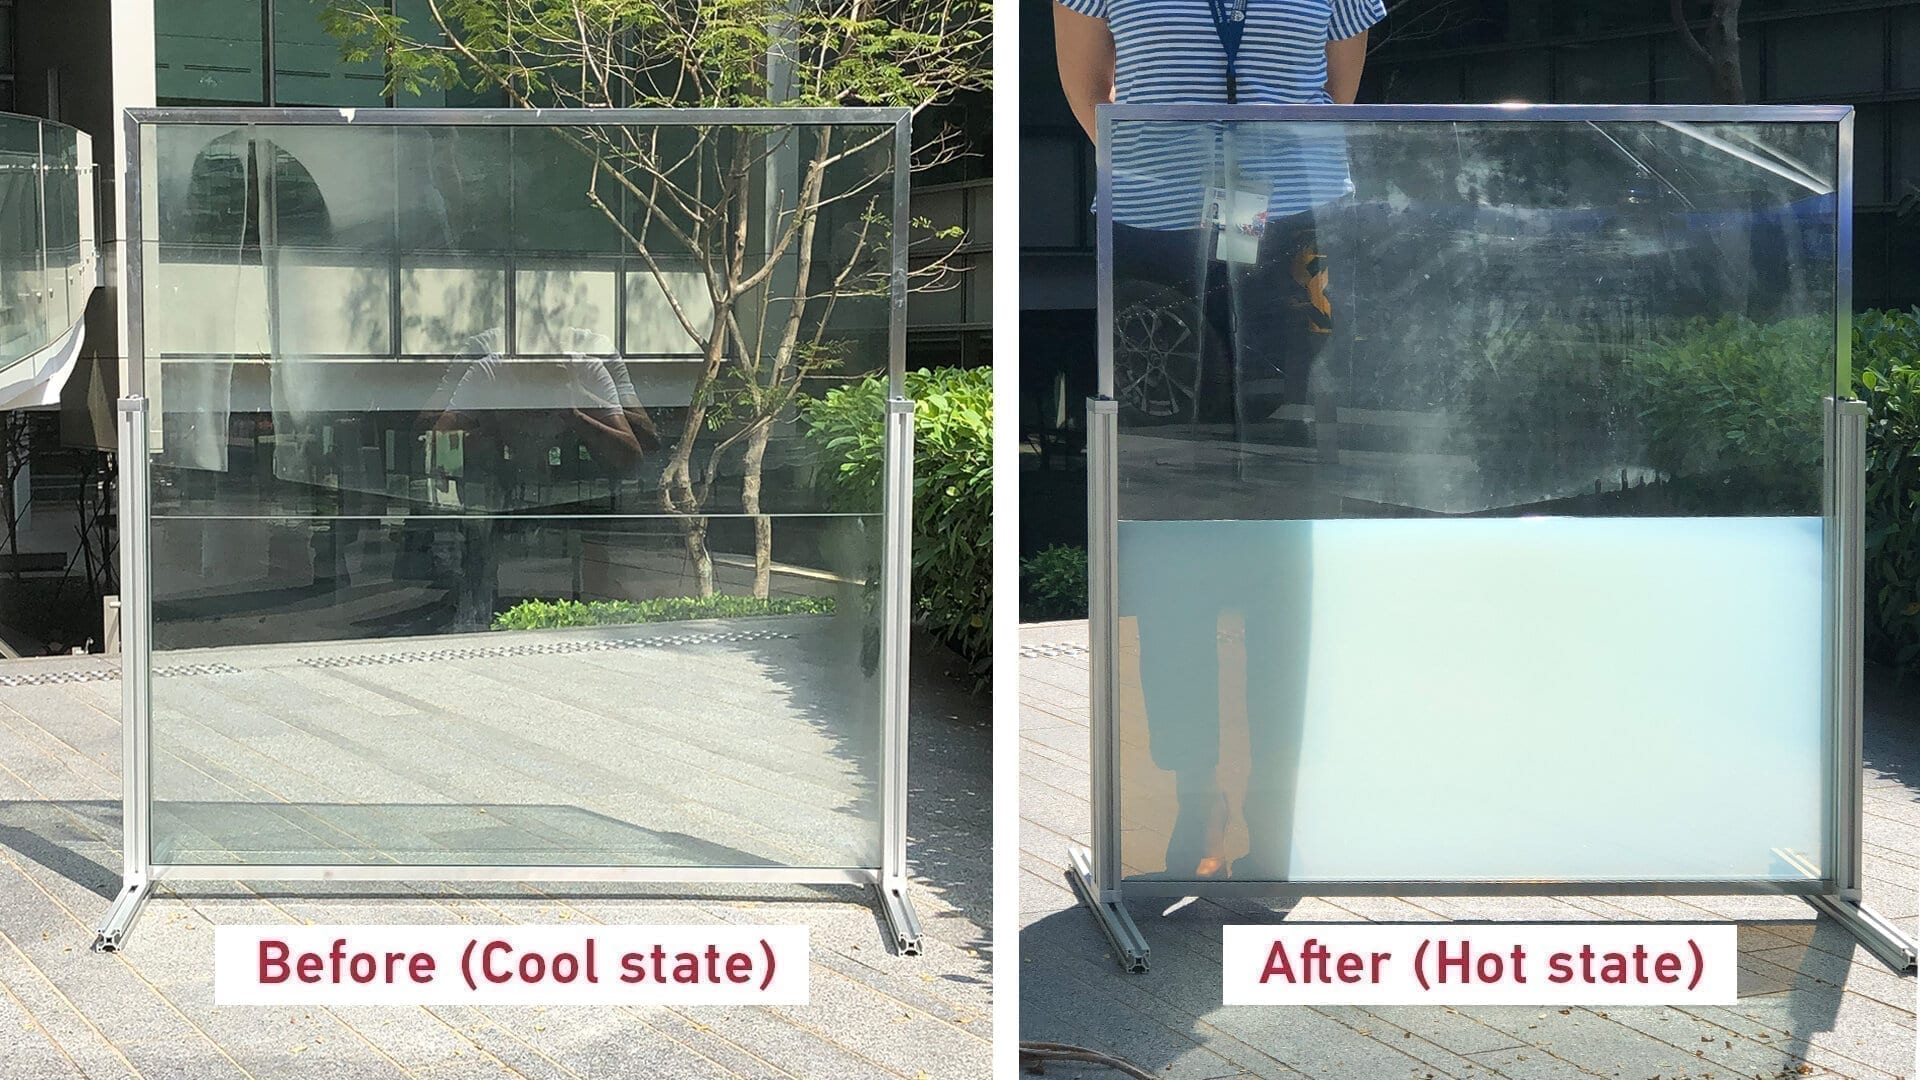 Could a liquid window save up to 45 per cent of energy consumption in buildings?